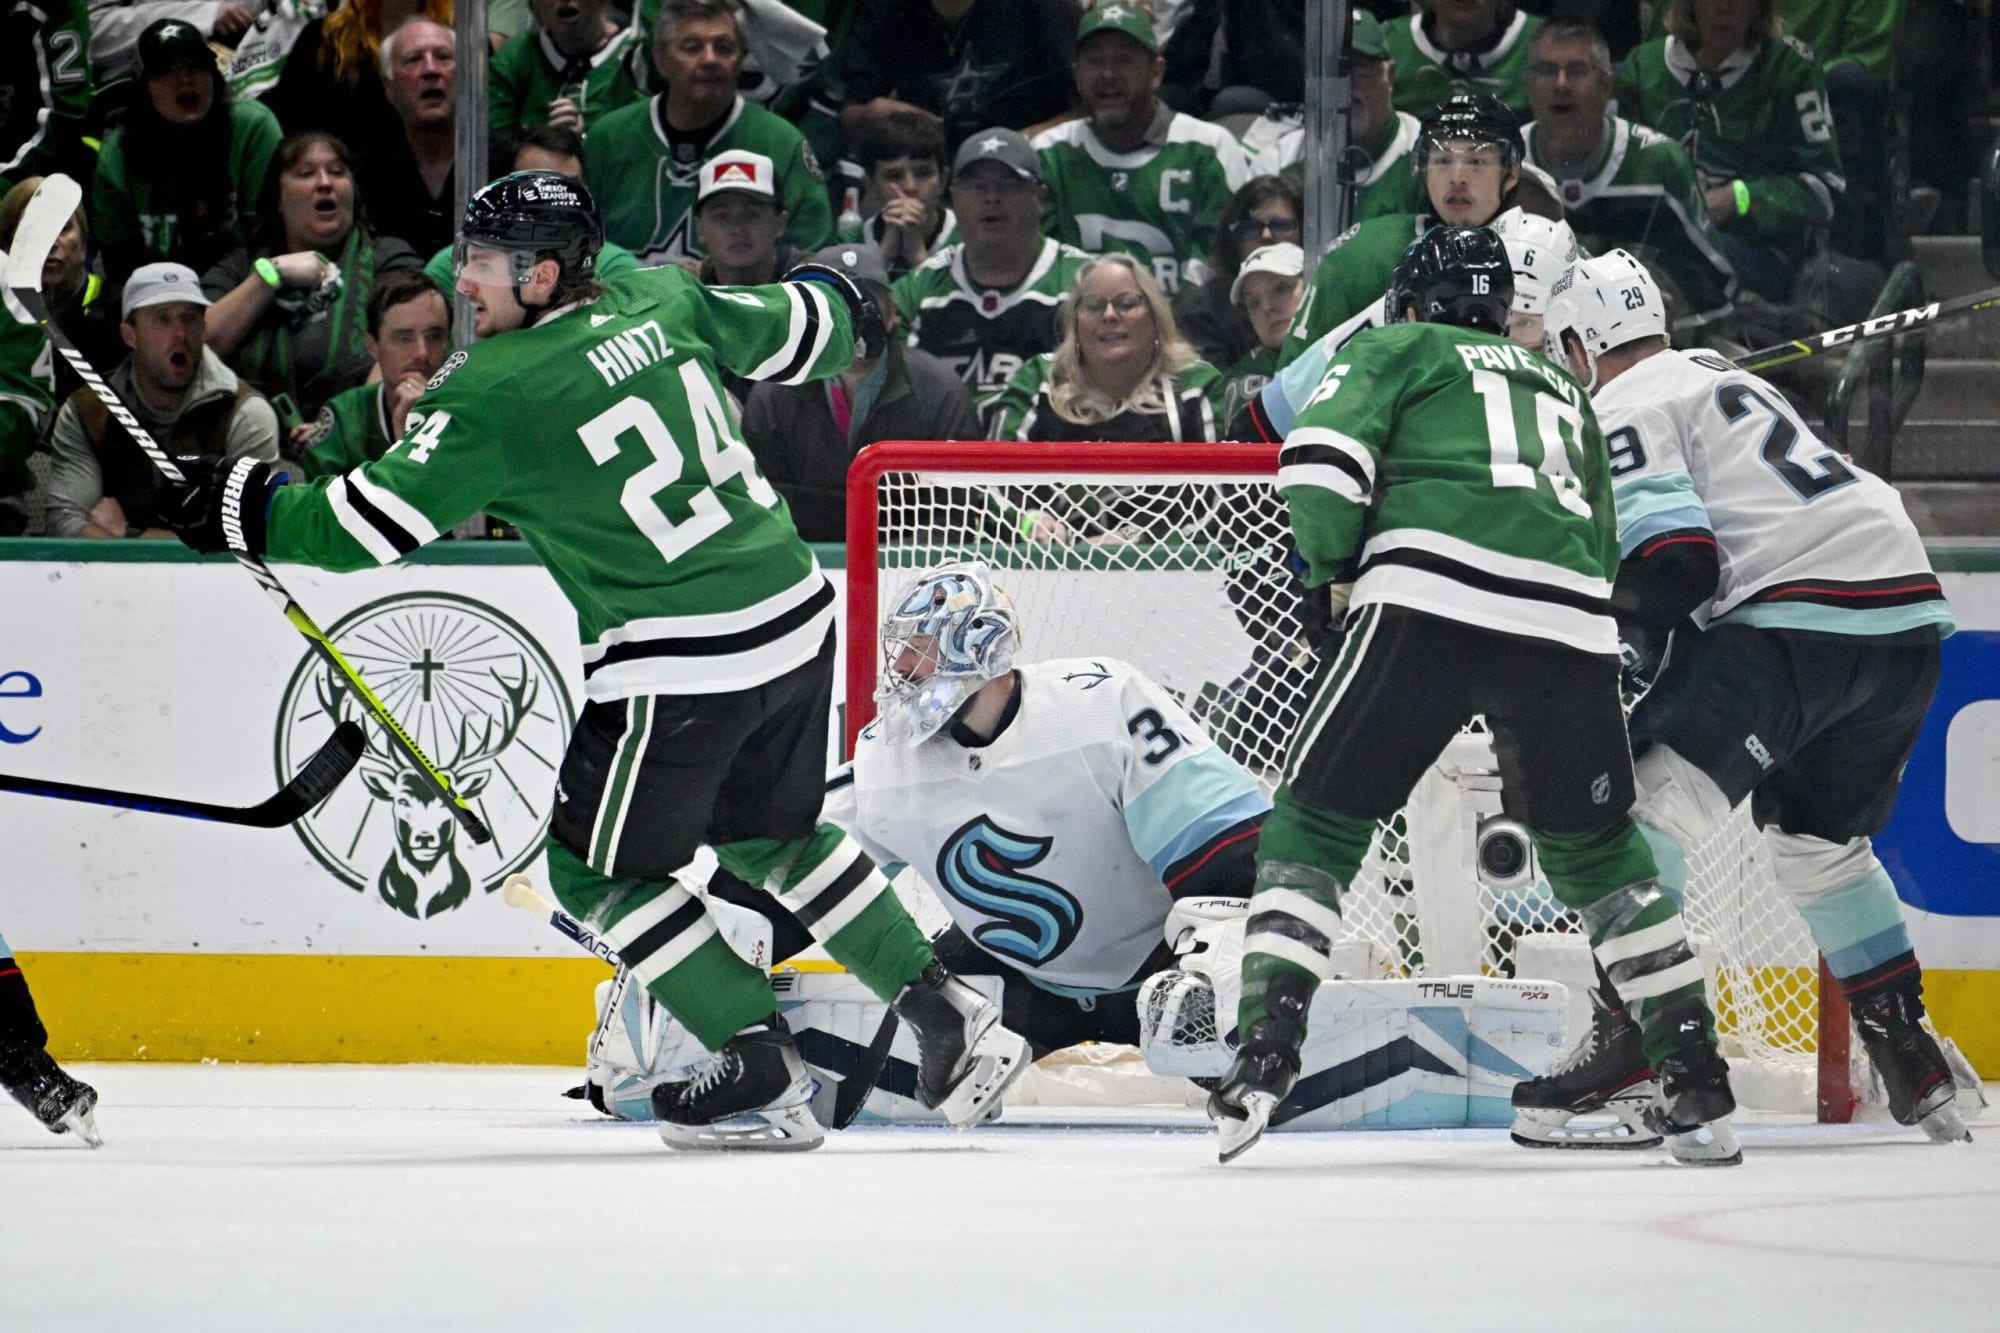 Dallas Stars look to send the Seattle Kraken packing in game 6 tonight